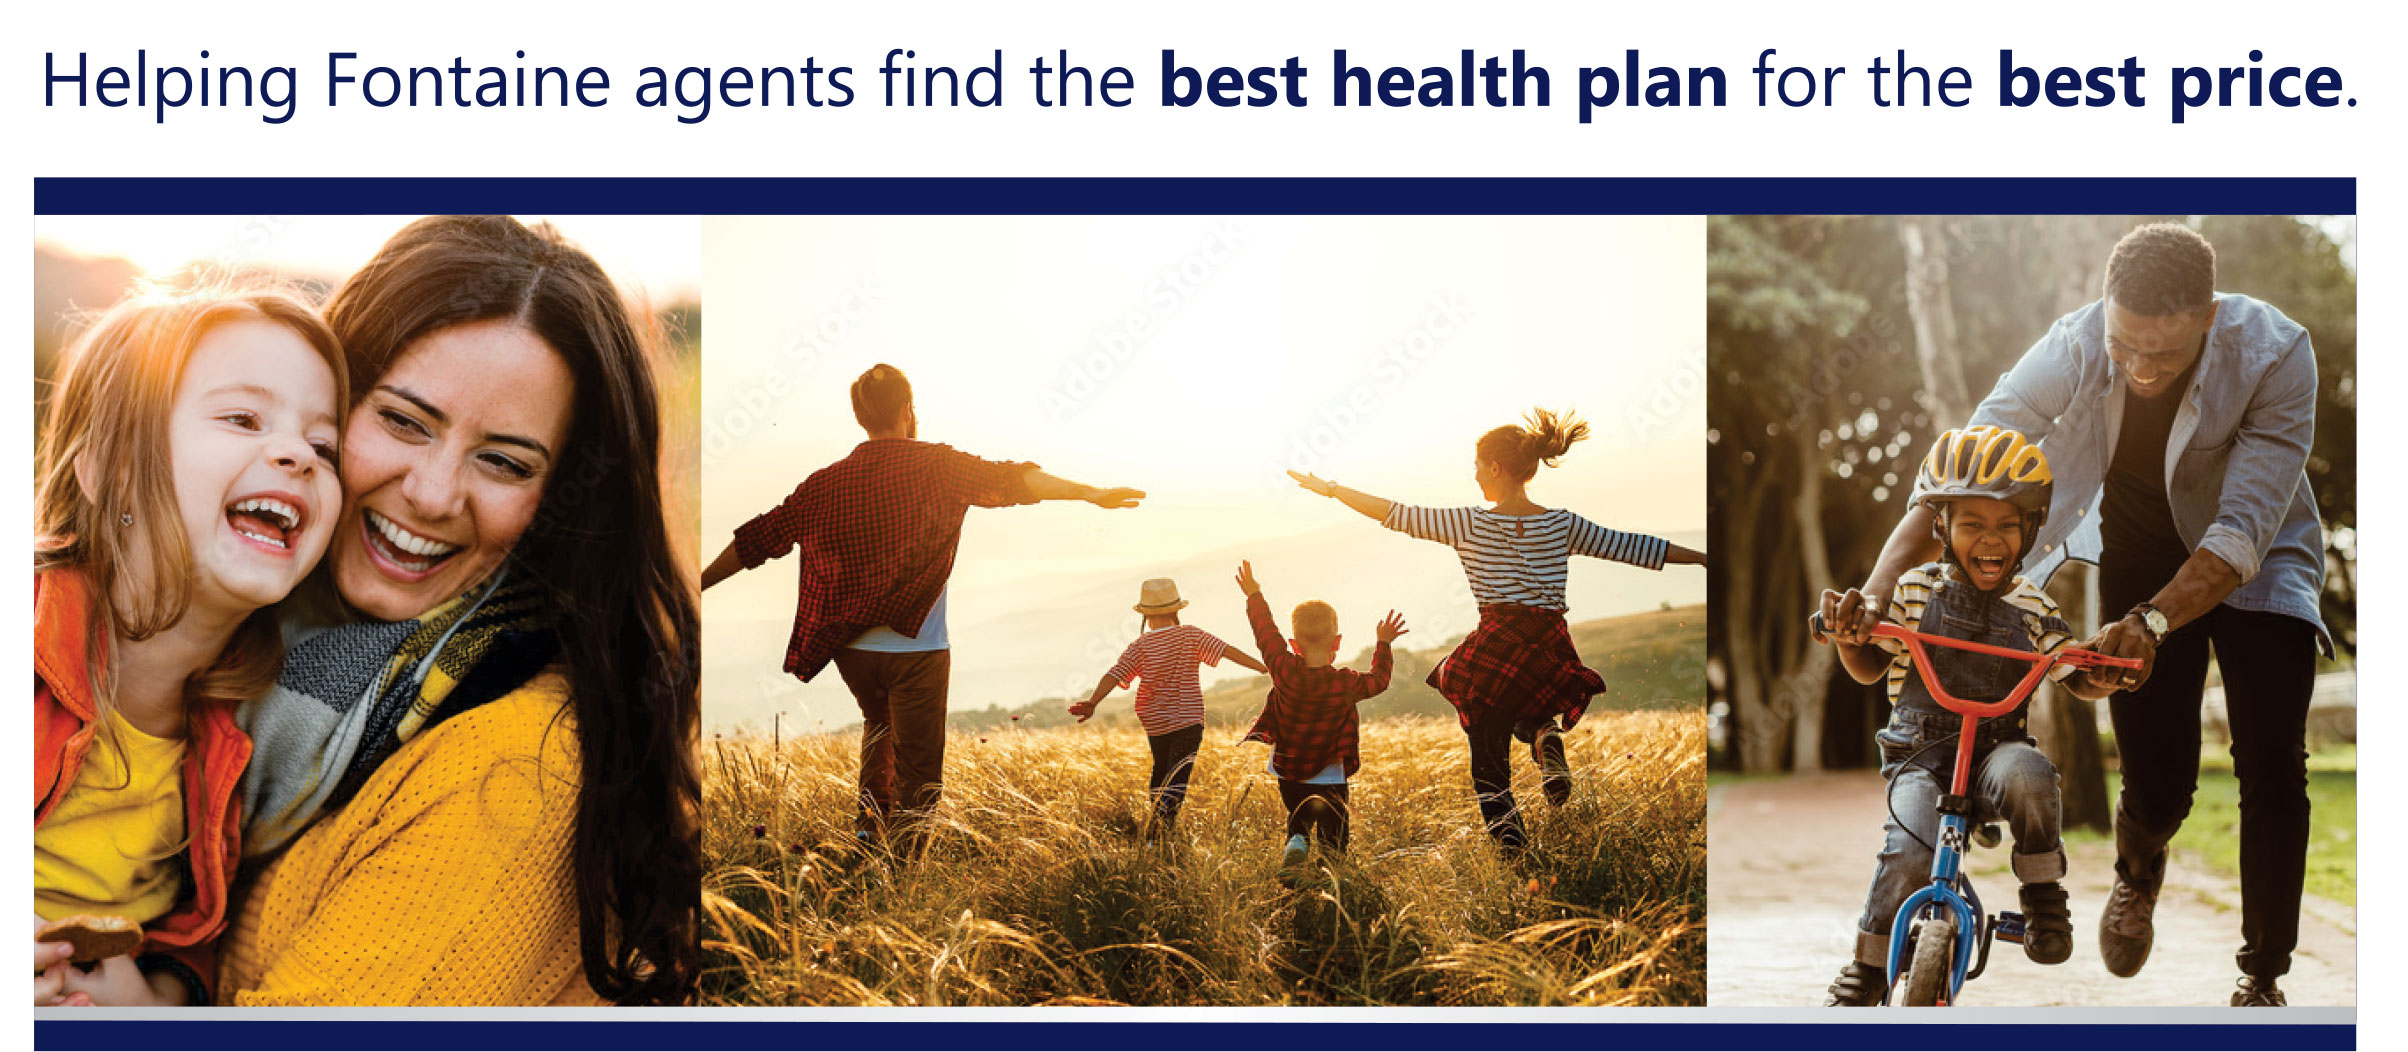 Helping Fontaine agents find the best health plan for the best price.